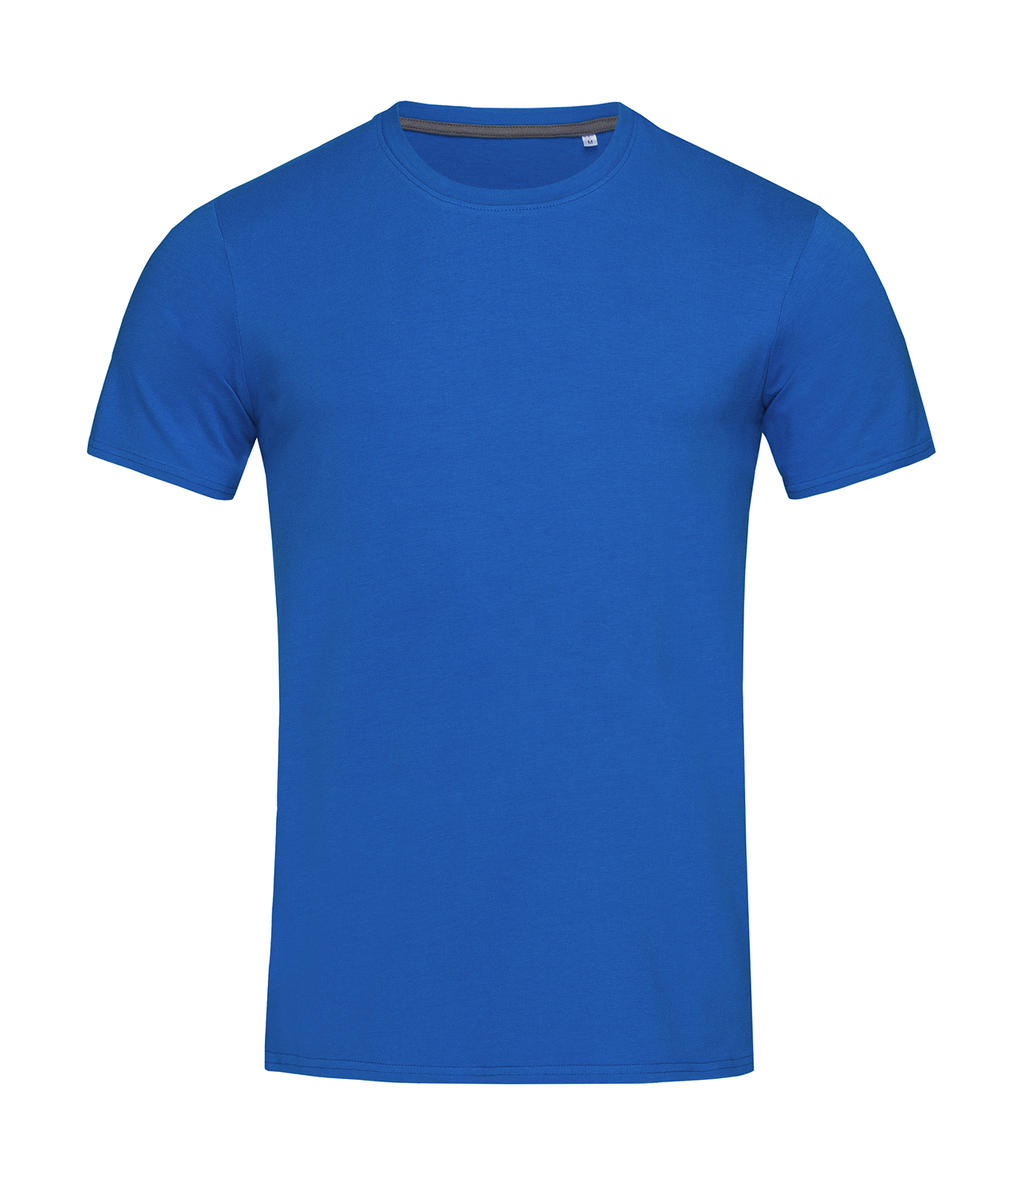  Clive Crew Neck  in Farbe King Blue